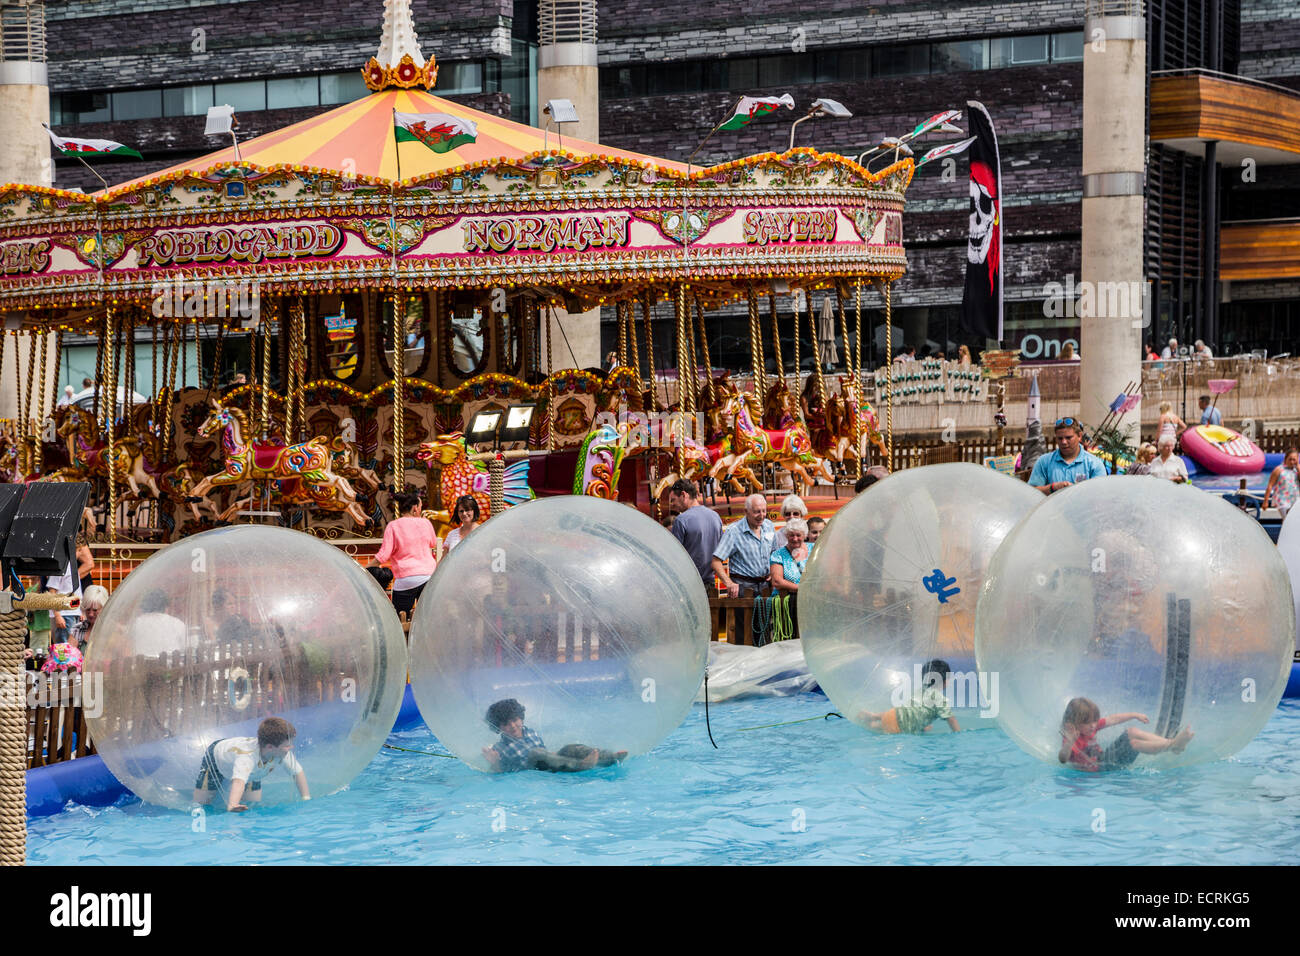 Children playing in floating balls at fun fair, Cardiff Bay, Wales, UK Stock Photo